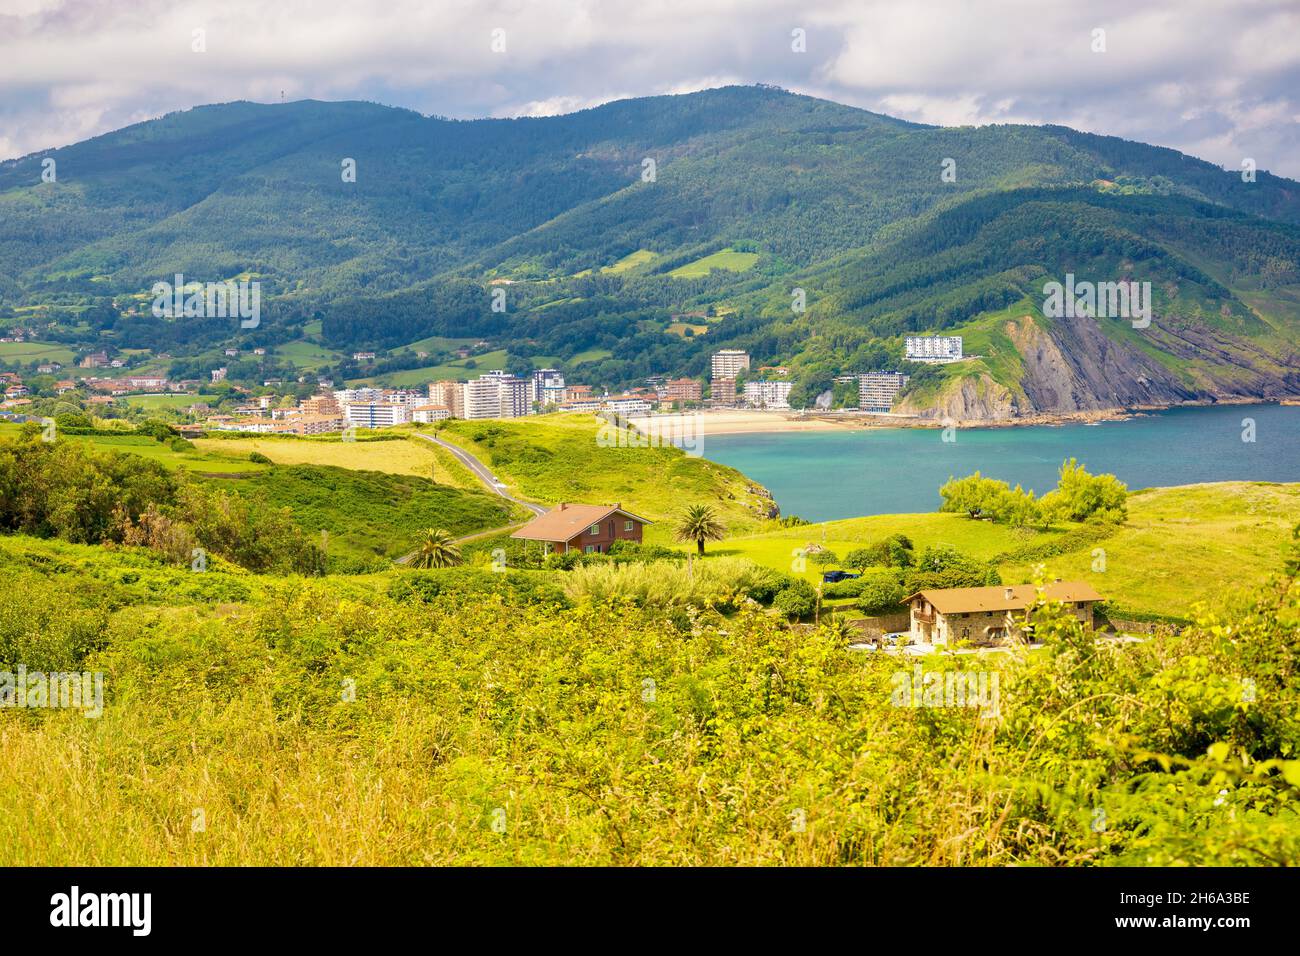 The road that runs along the coast leads to Bakio beach that can be seen in the background. Euskadi, Spain Stock Photo